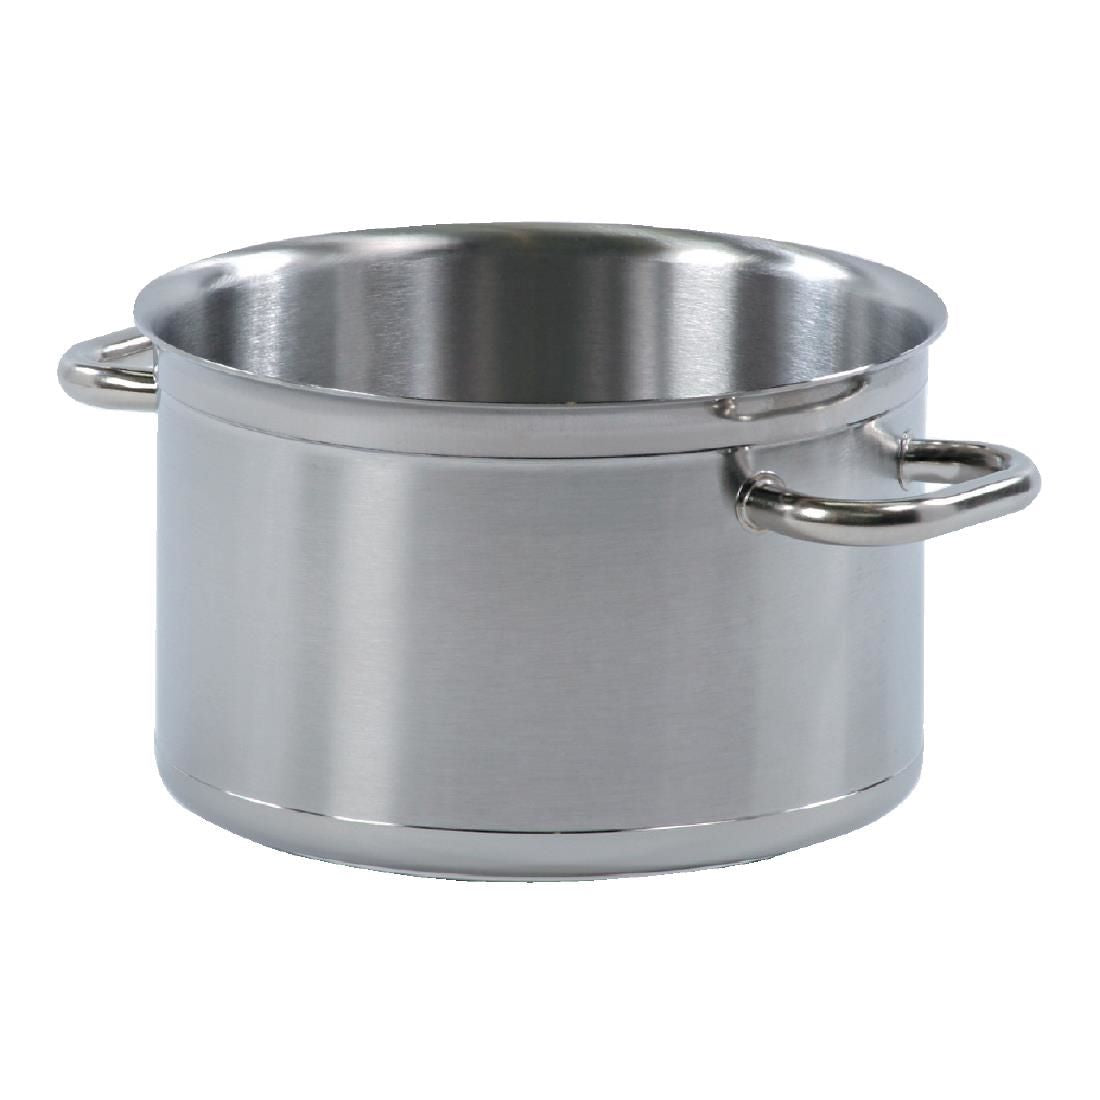 Bourgeat Tradition Plus Boiling Pan 24Ltr JD Catering Equipment Solutions Ltd